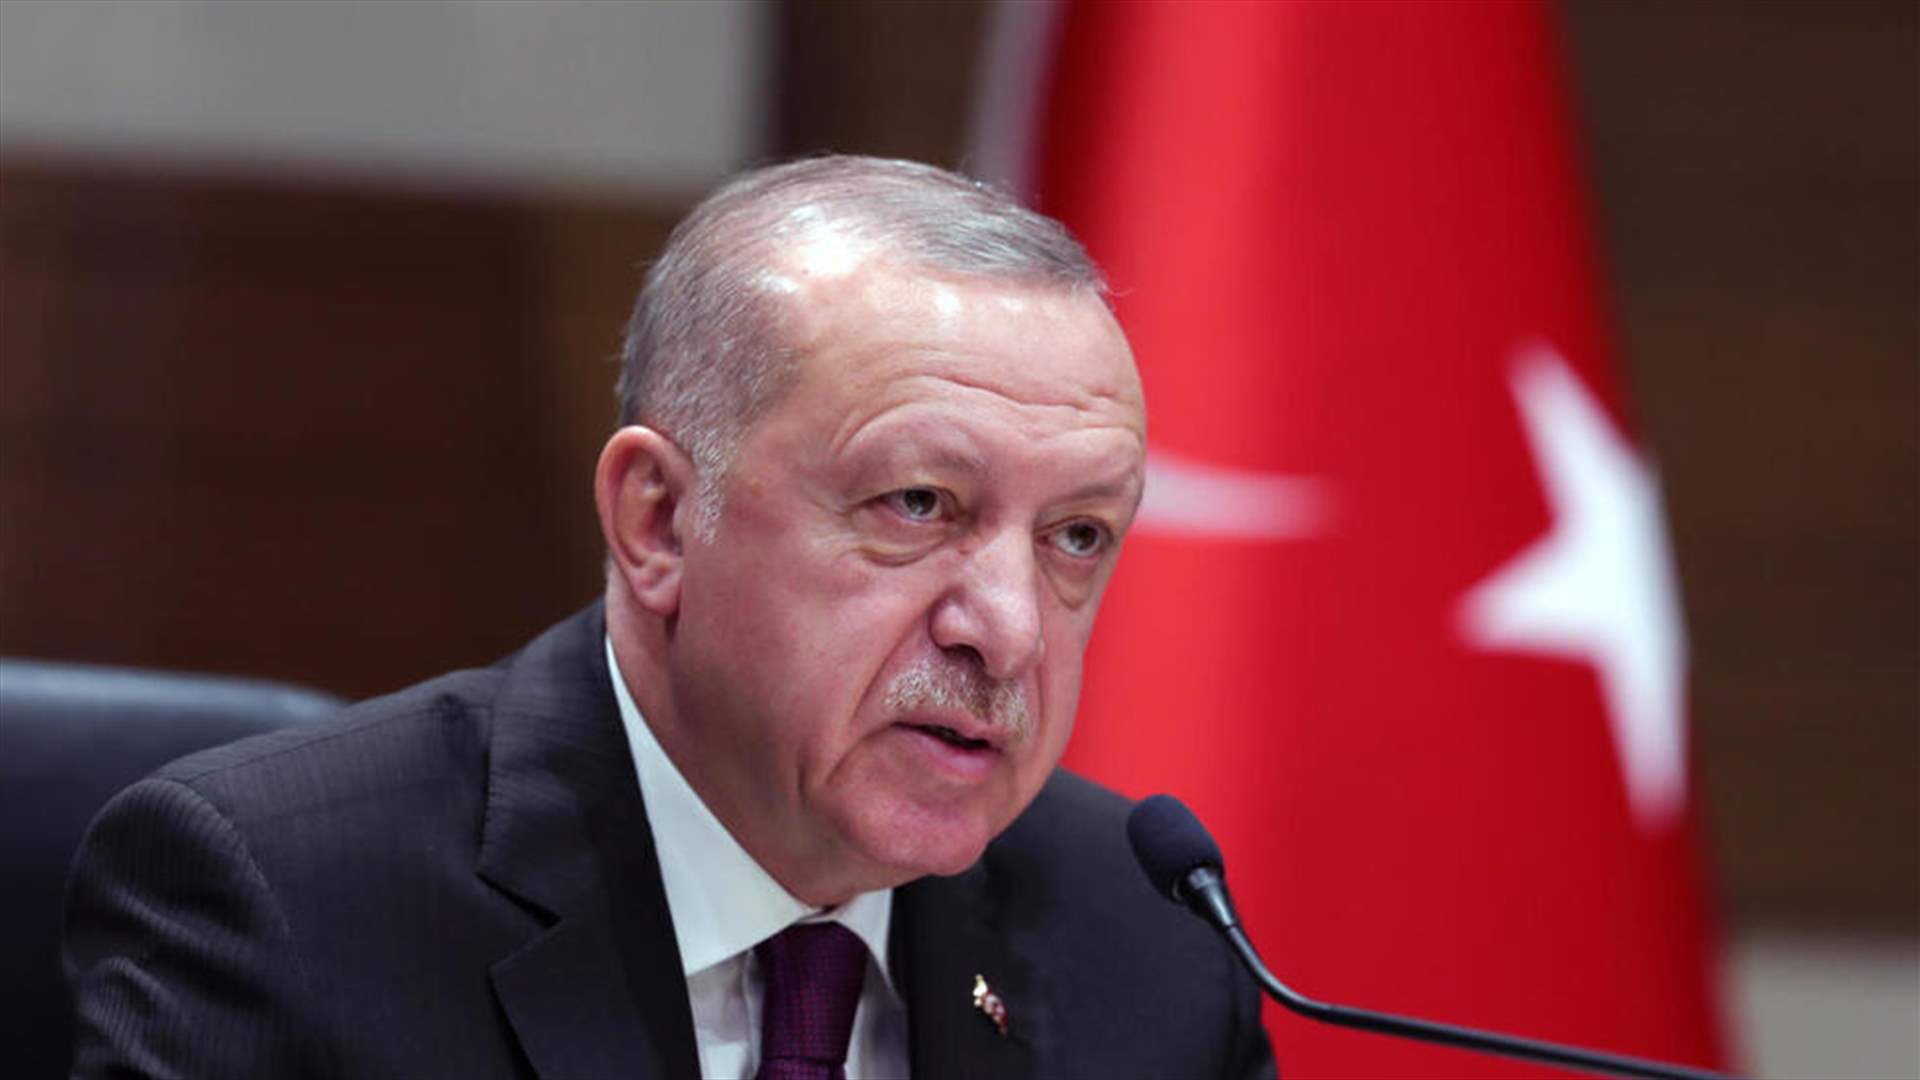 Turkey says Israel must be held accountable for war crimes